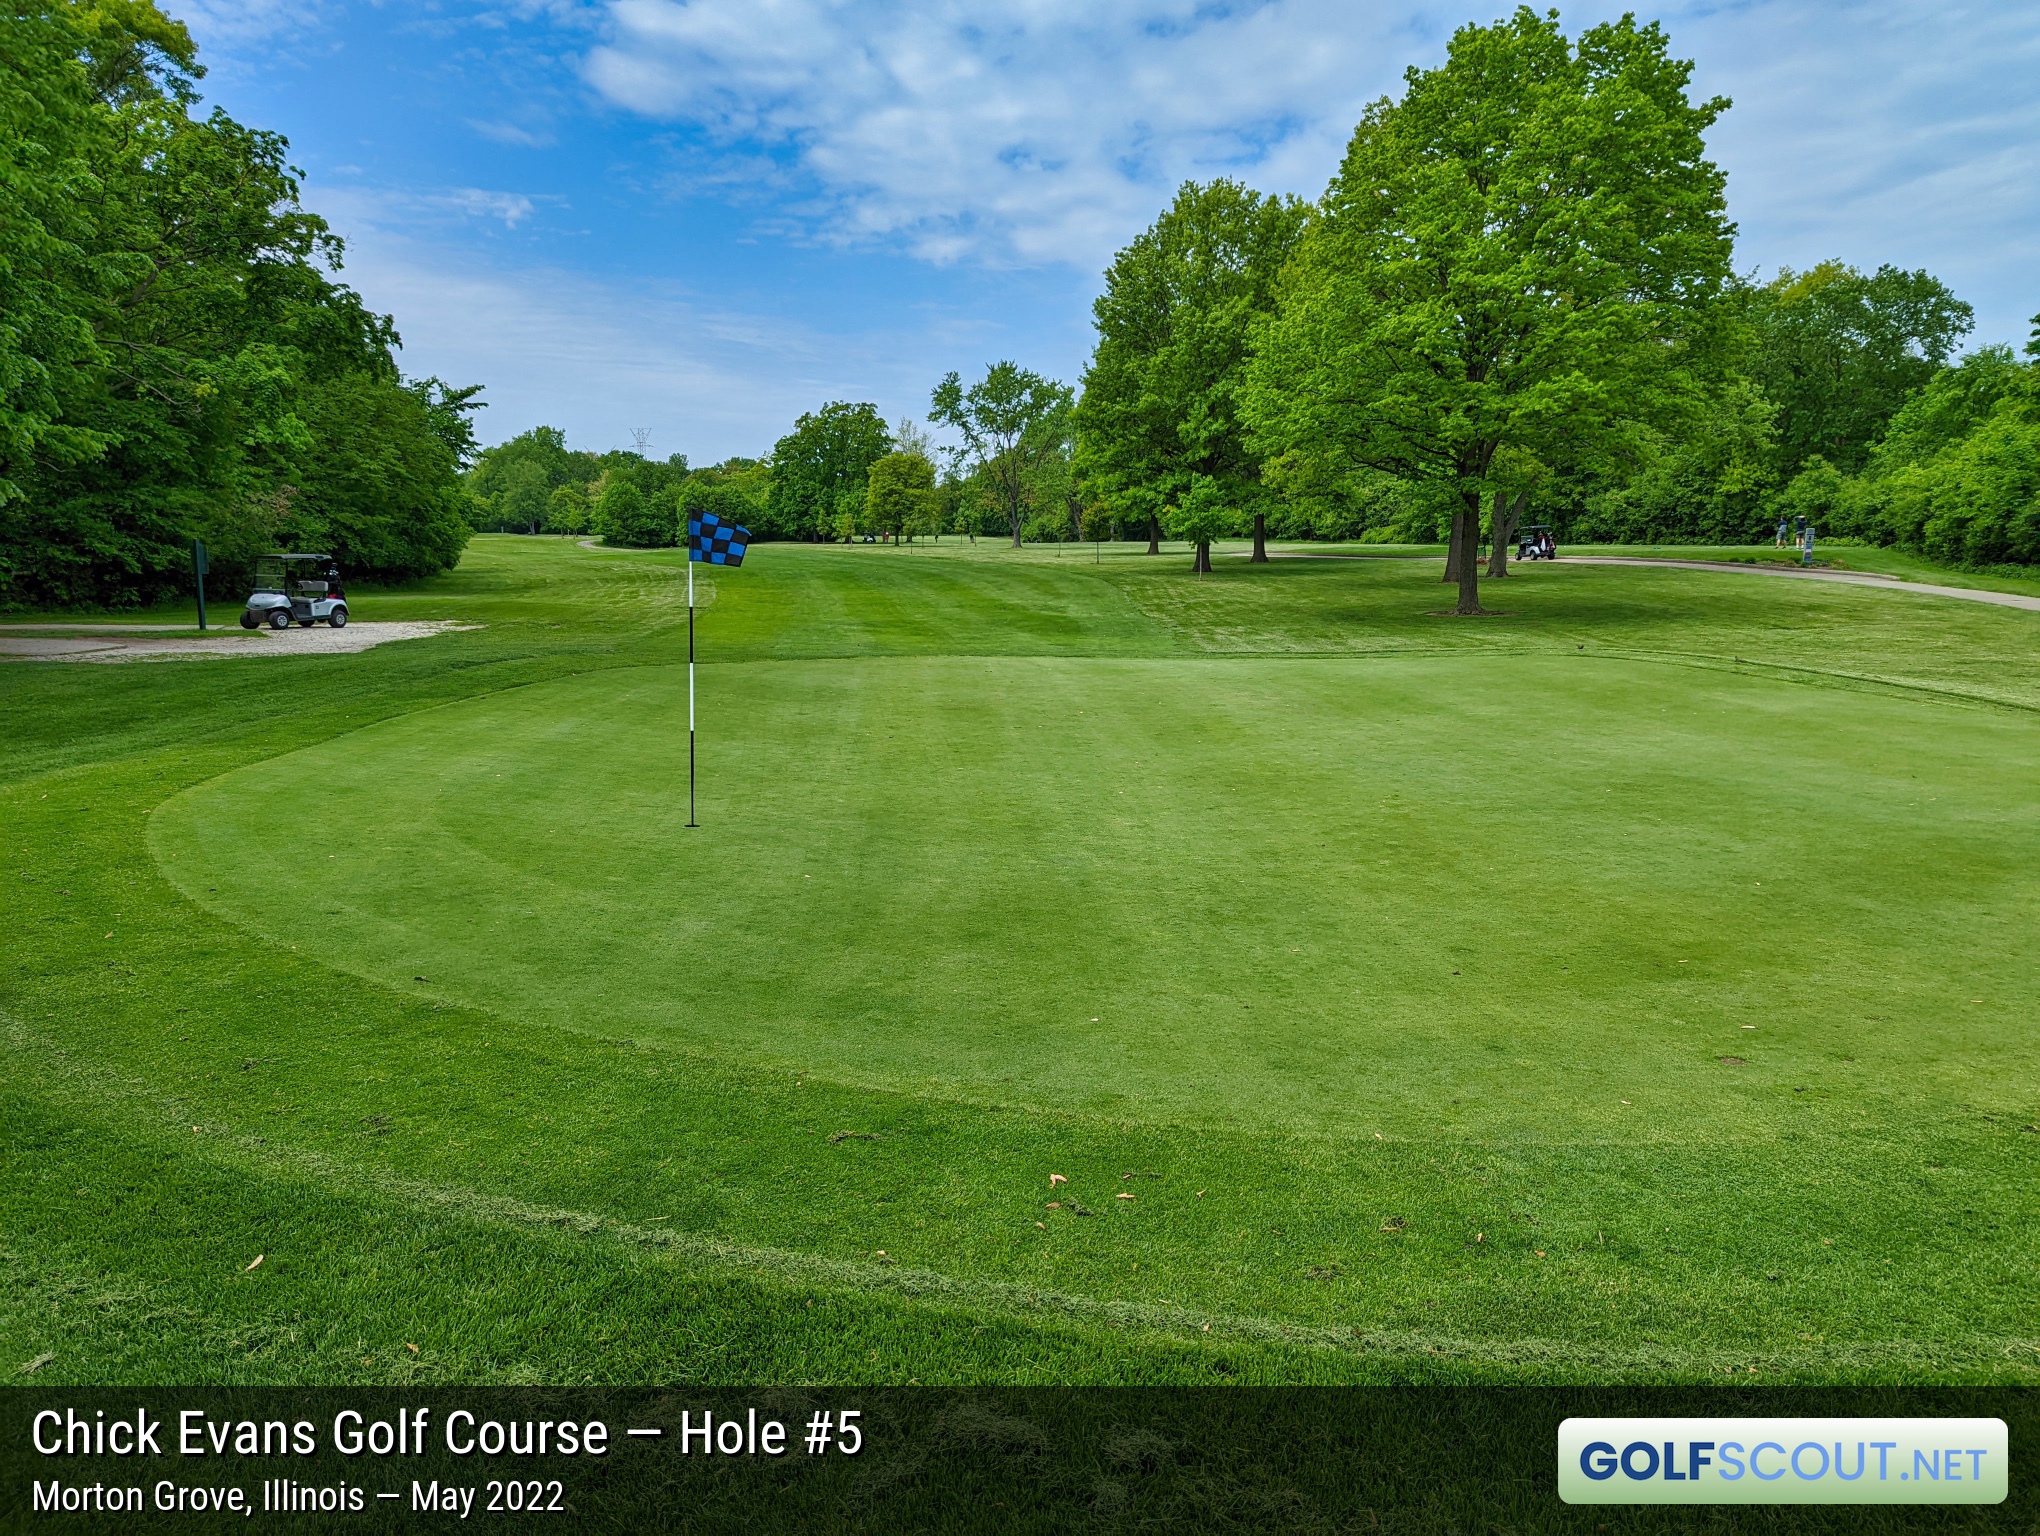 Photo of hole #5 at Chick Evans Golf Course in Morton Grove, Illinois. 